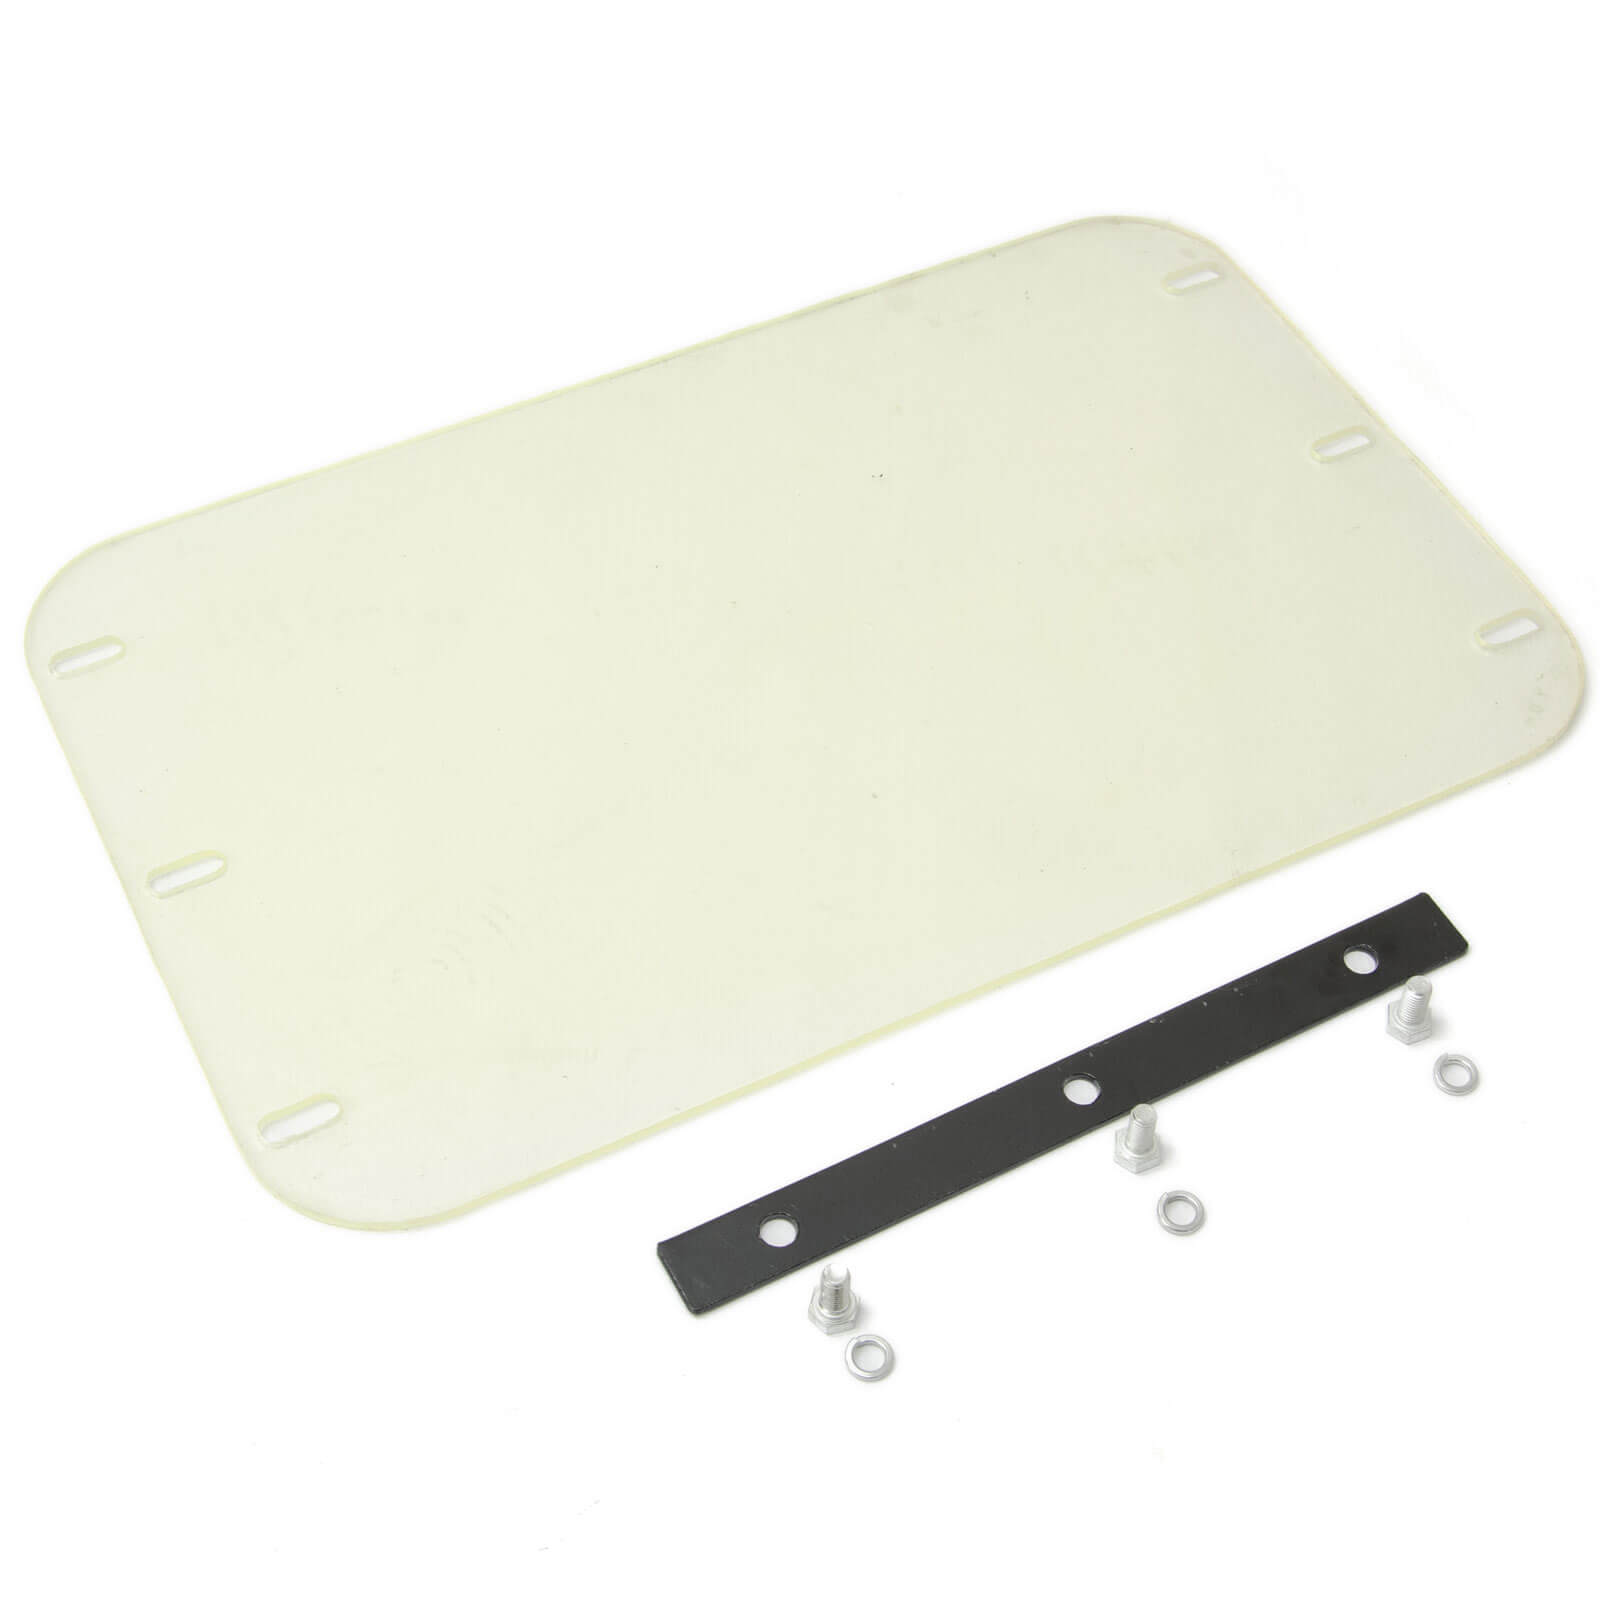 Image of Handy Paving Pad for THLC29142 Compactor Plates